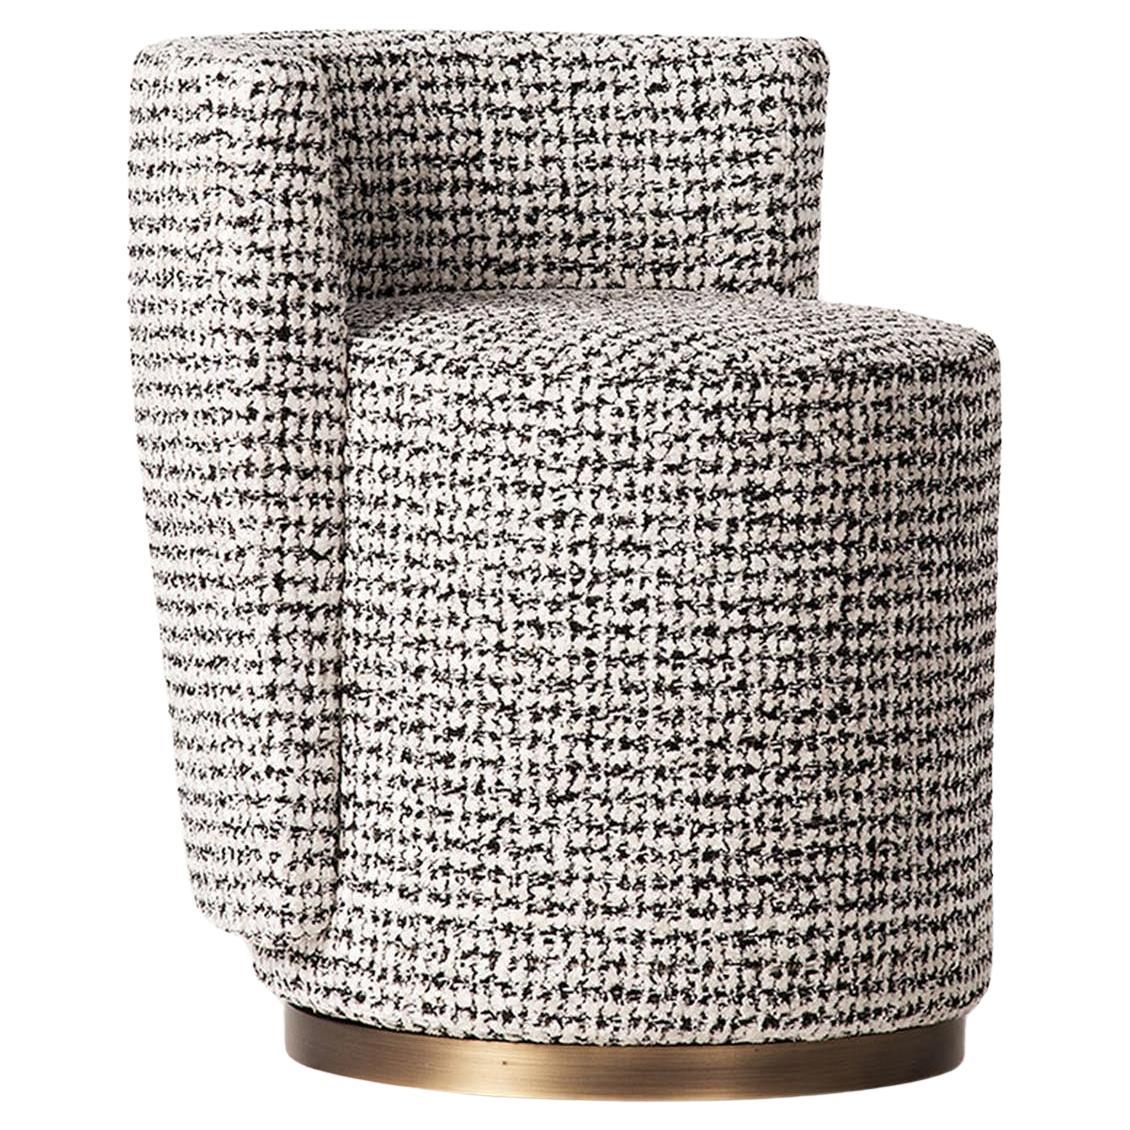 Contemporary Armchair 'Bond Street' by Man of Parts, Kvadrat, Balboa, 0019 For Sale 5